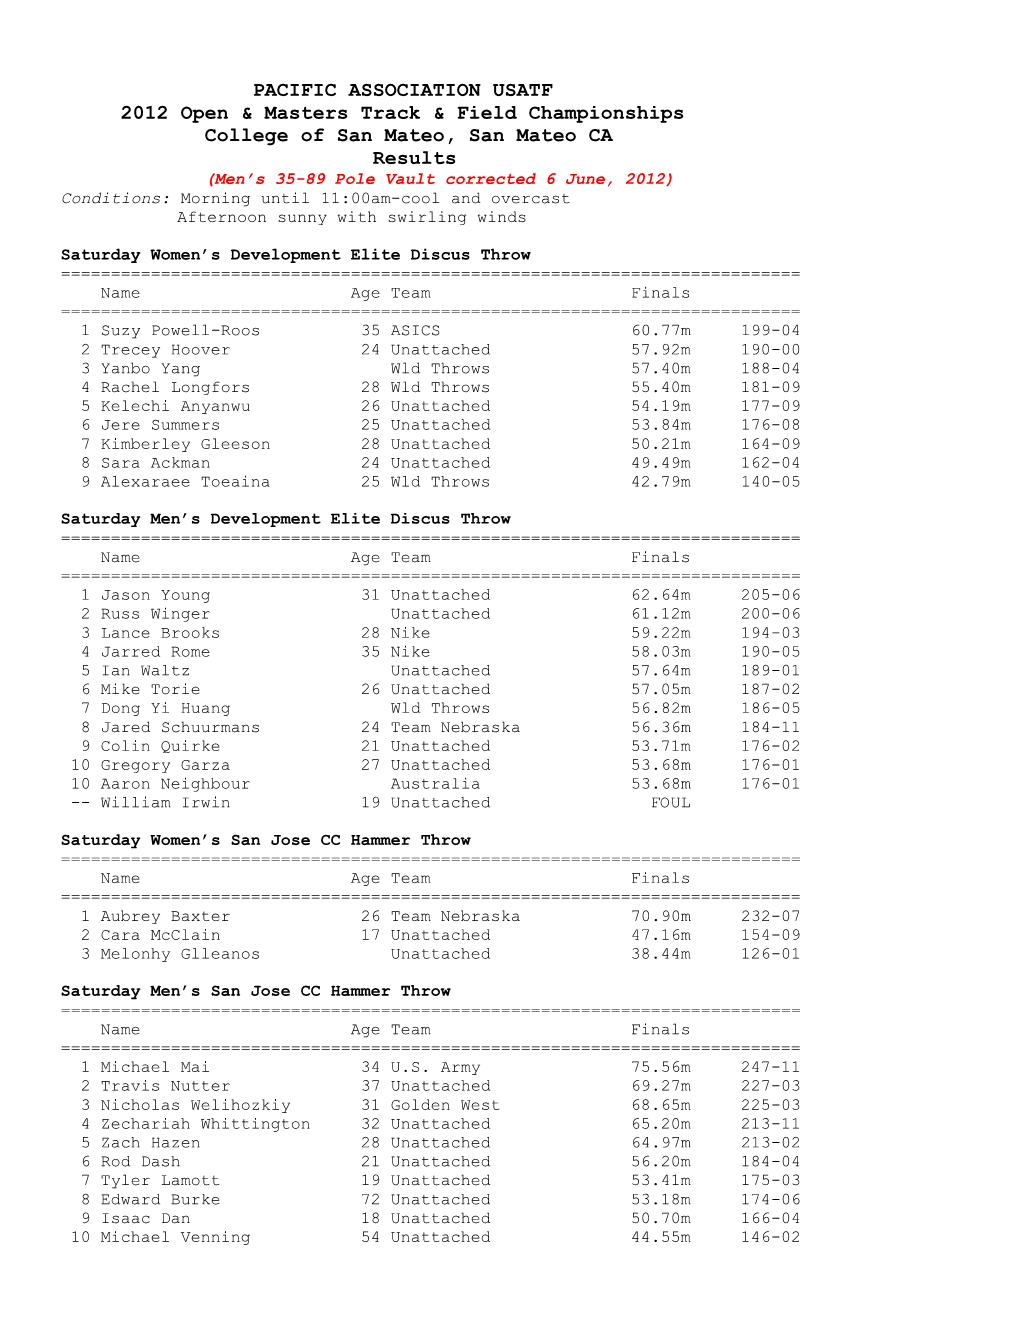 PACIFIC ASSOCIATION USATF 2012 Open & Masters Track & Field Championships College of San Mateo, San Mateo CA Results